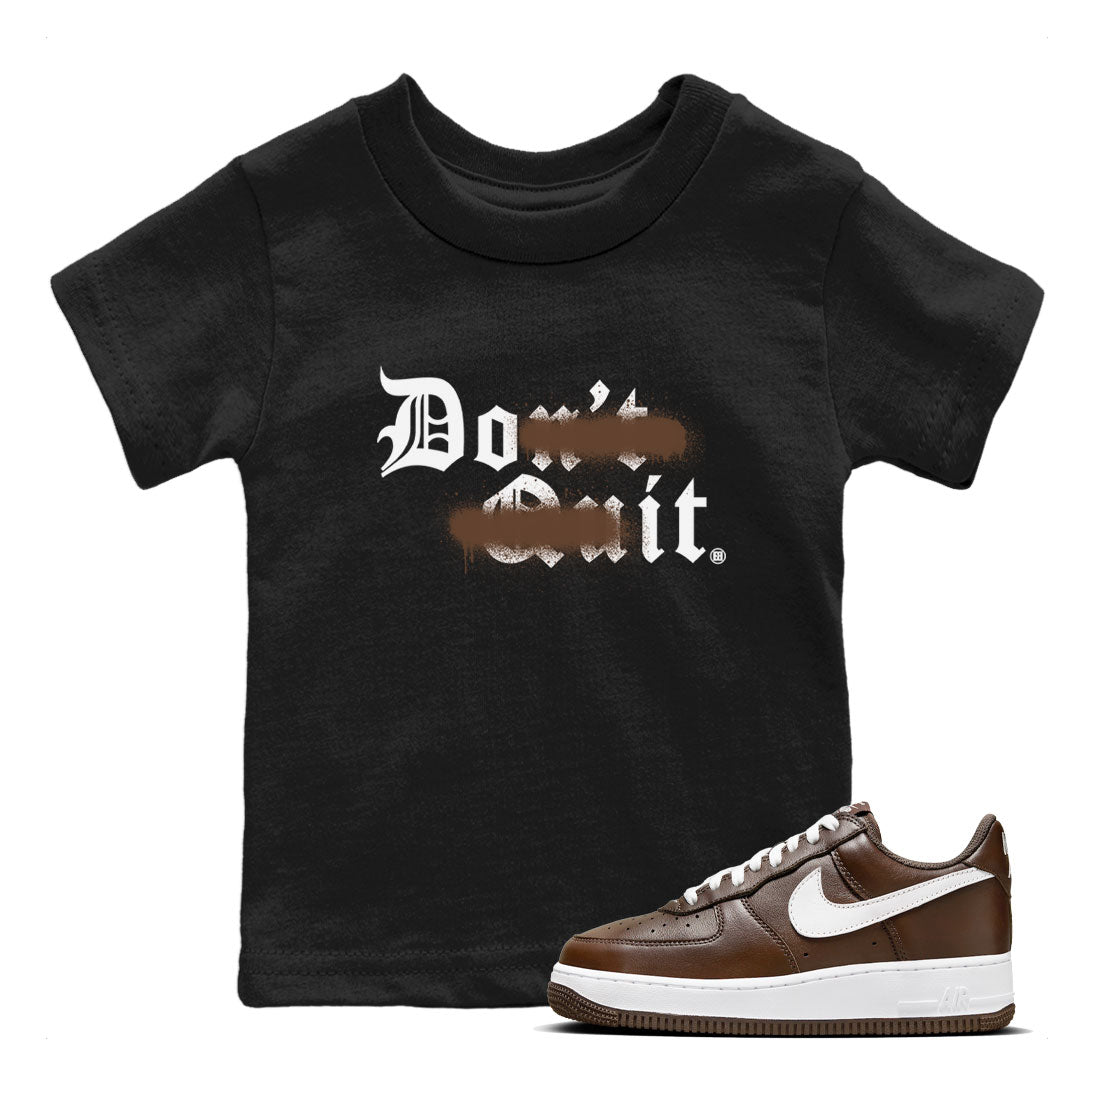 AF1 Chocolate shirt to match jordans Don't Quit Do It sneaker tees Air Force 1 Chocolate SNRT Sneaker Tees Youth Kid's Baby Shirt Black 1 T-Shirt